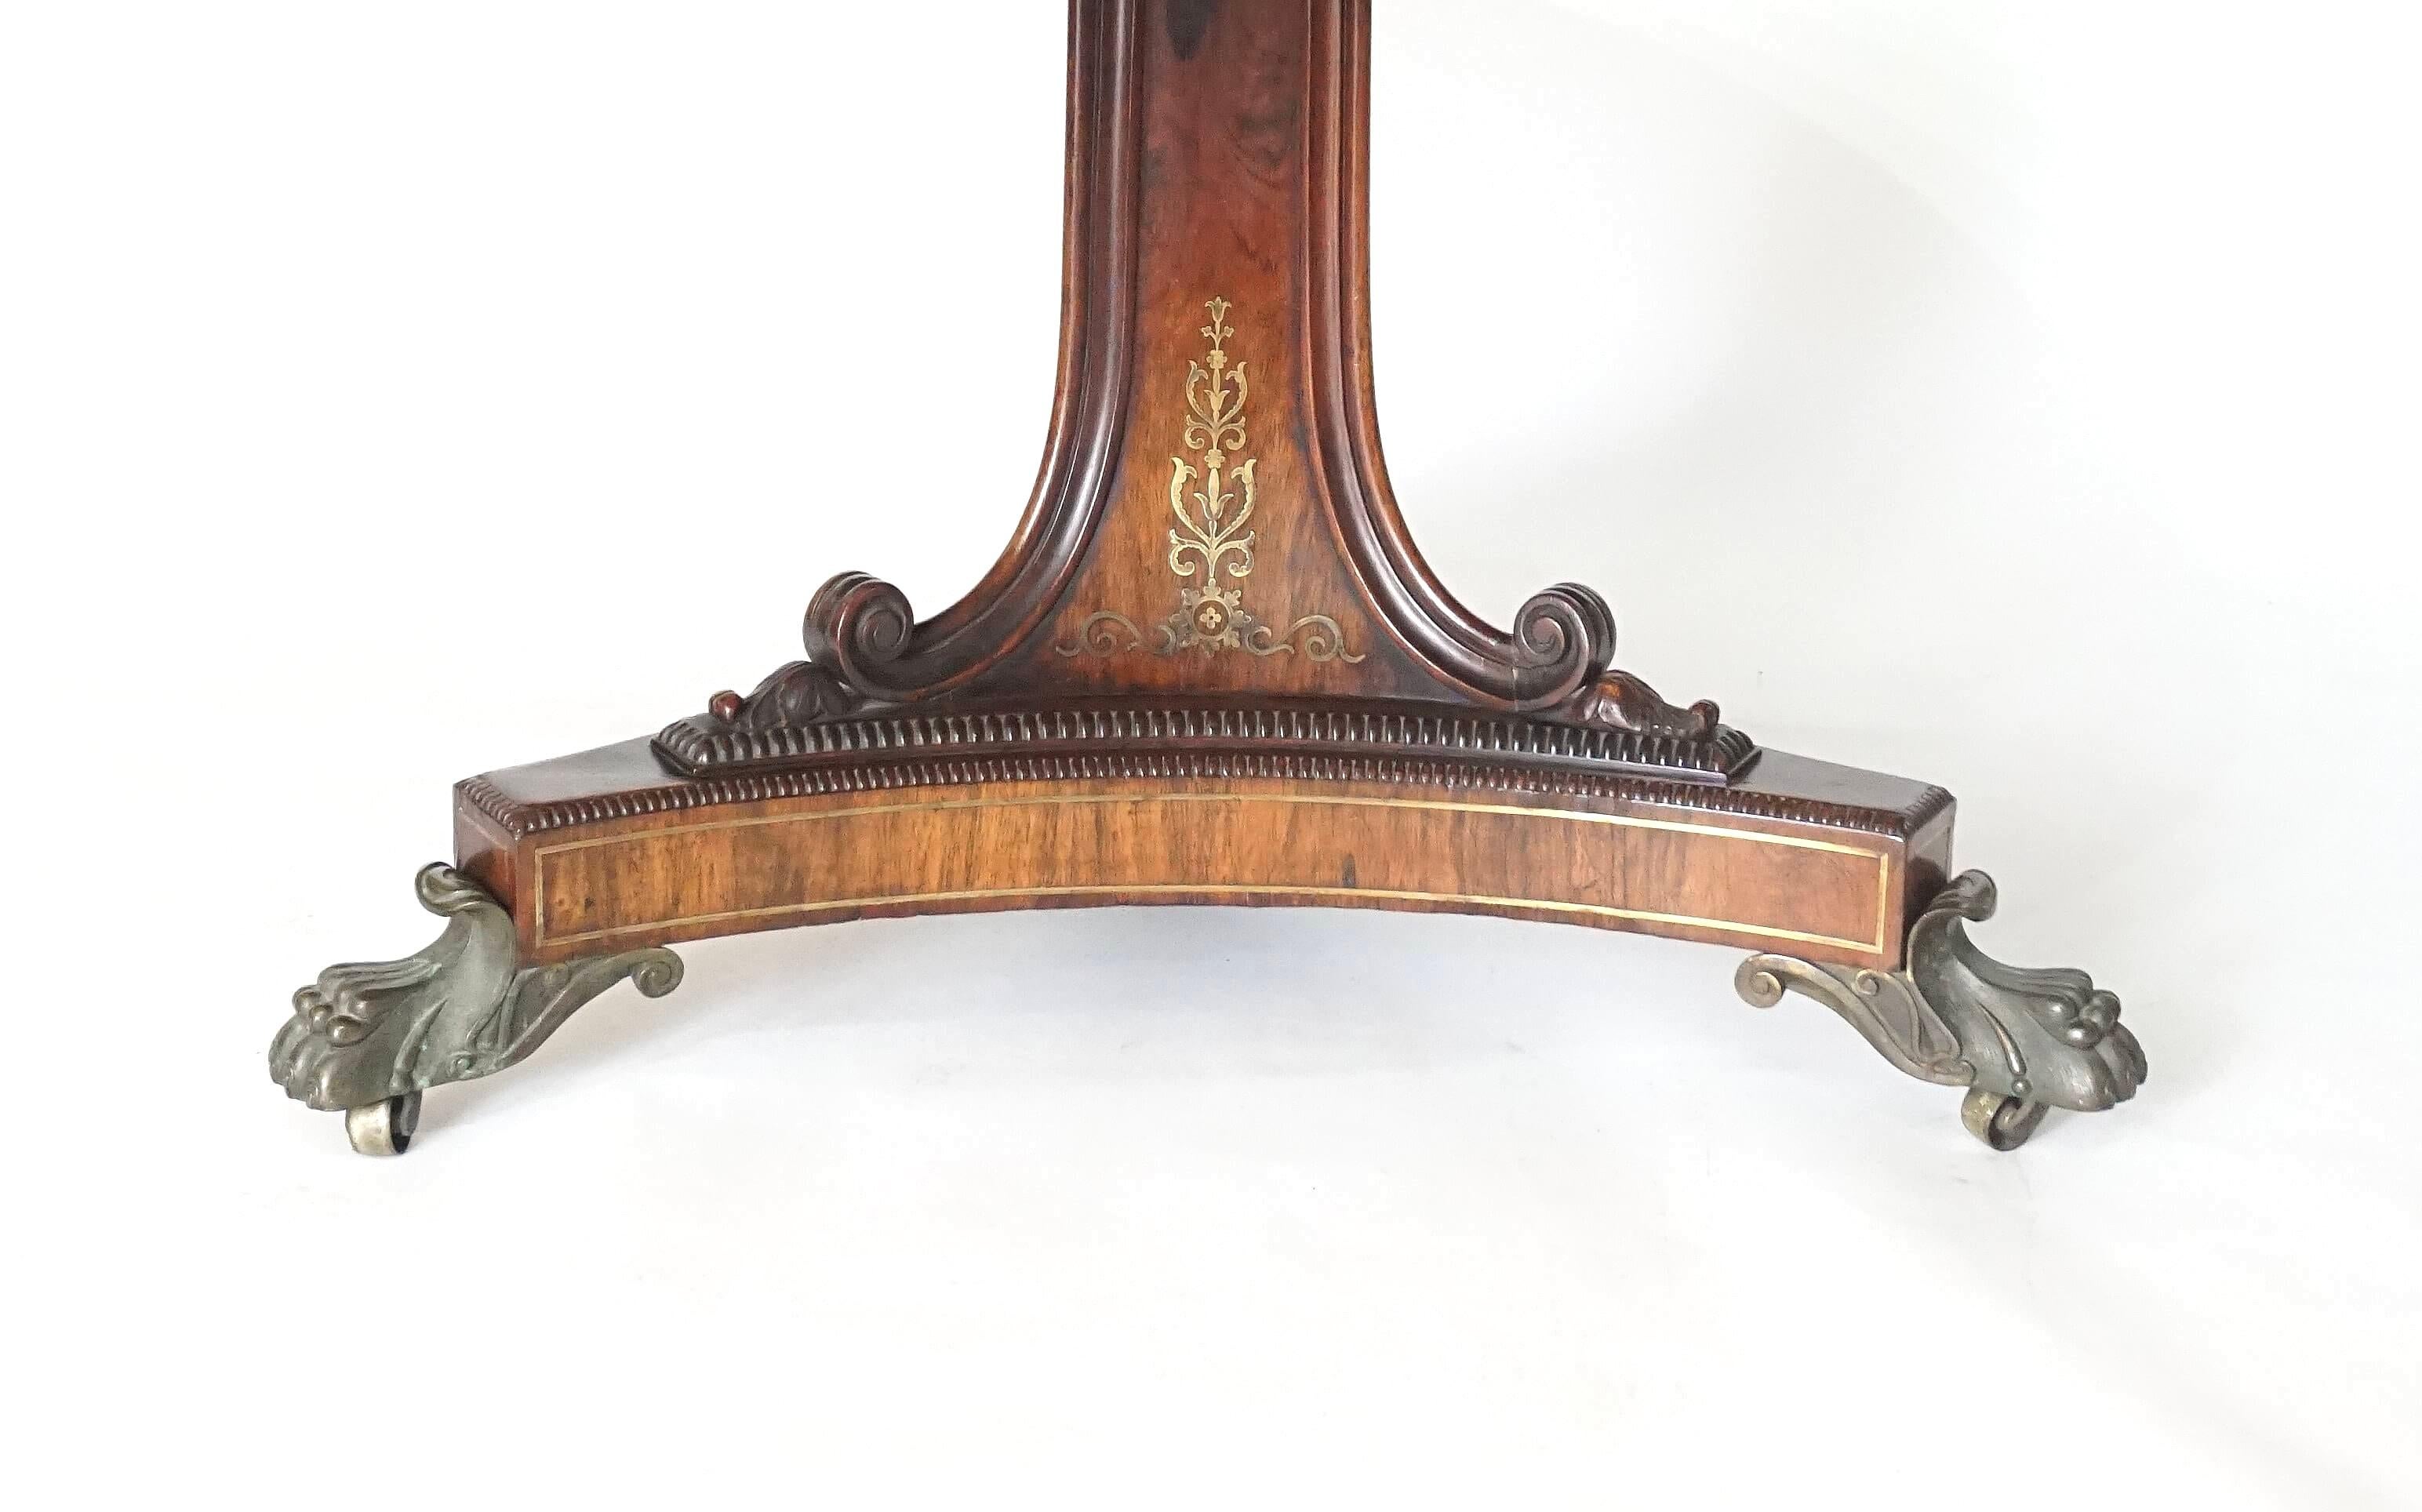 Hand-Carved English Regency Brass Inlaid Rosewood Tilt-Top Center Table, circa 1820 For Sale